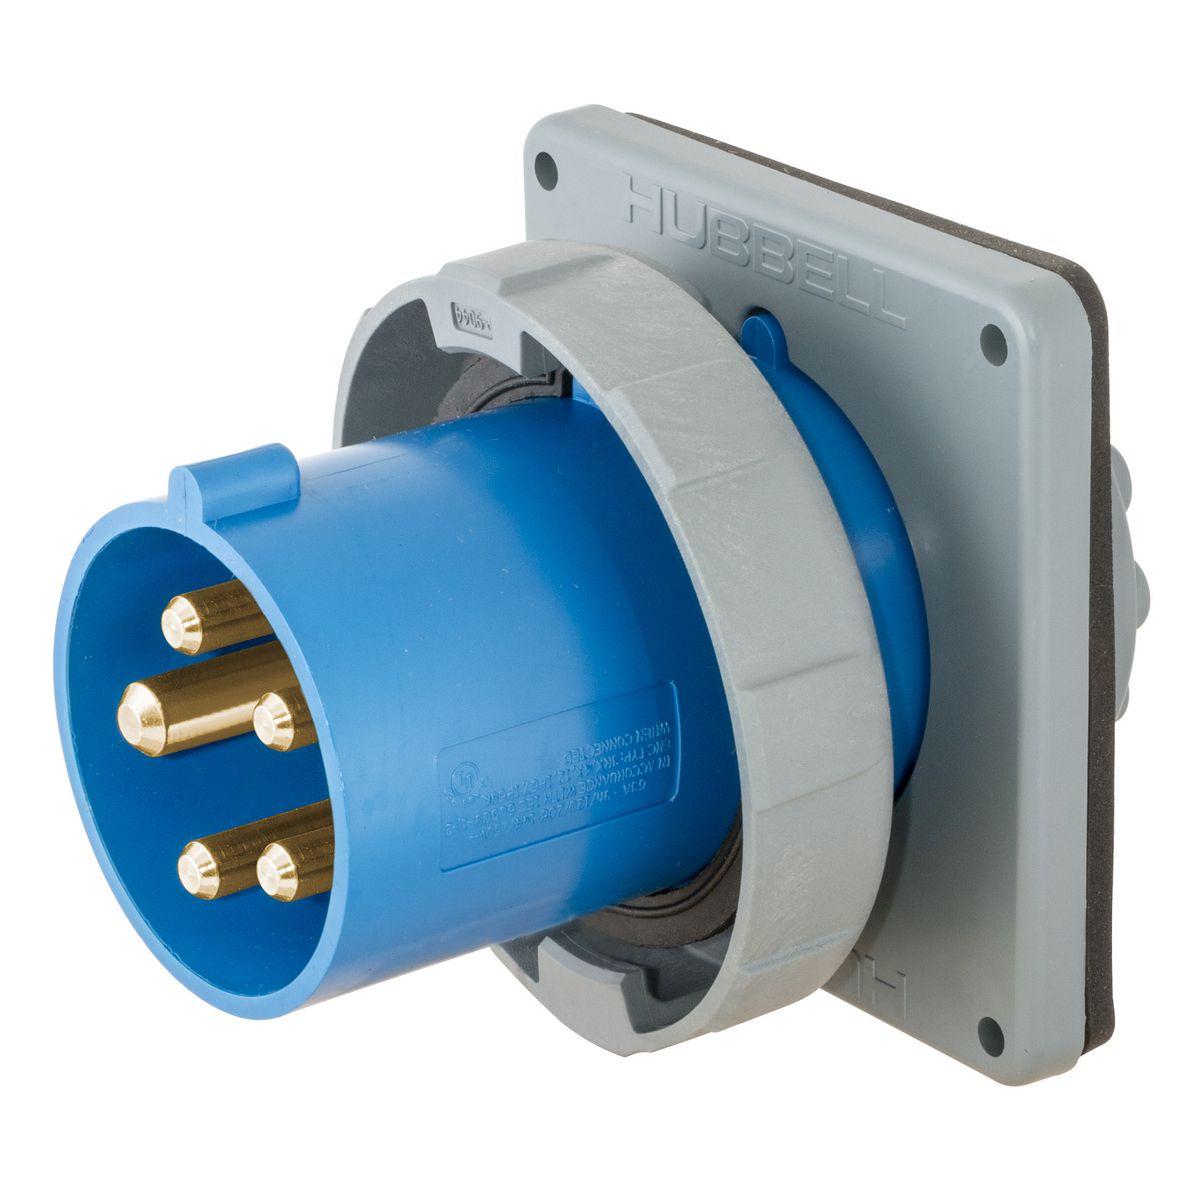 Hubbell HBL560B9W Heavy Duty Products, IEC Pin and Sleeve Devices, Industrial Grade, Male, Flanged Inlet, 60A 3-Phase Wye 120/208V AC, 4-Pole 5-Wire Grounding, Terminal Screws, Blue, Watertight  ; Solid one-piece pins for reliable electrical contact ; Gasketed sealing ring